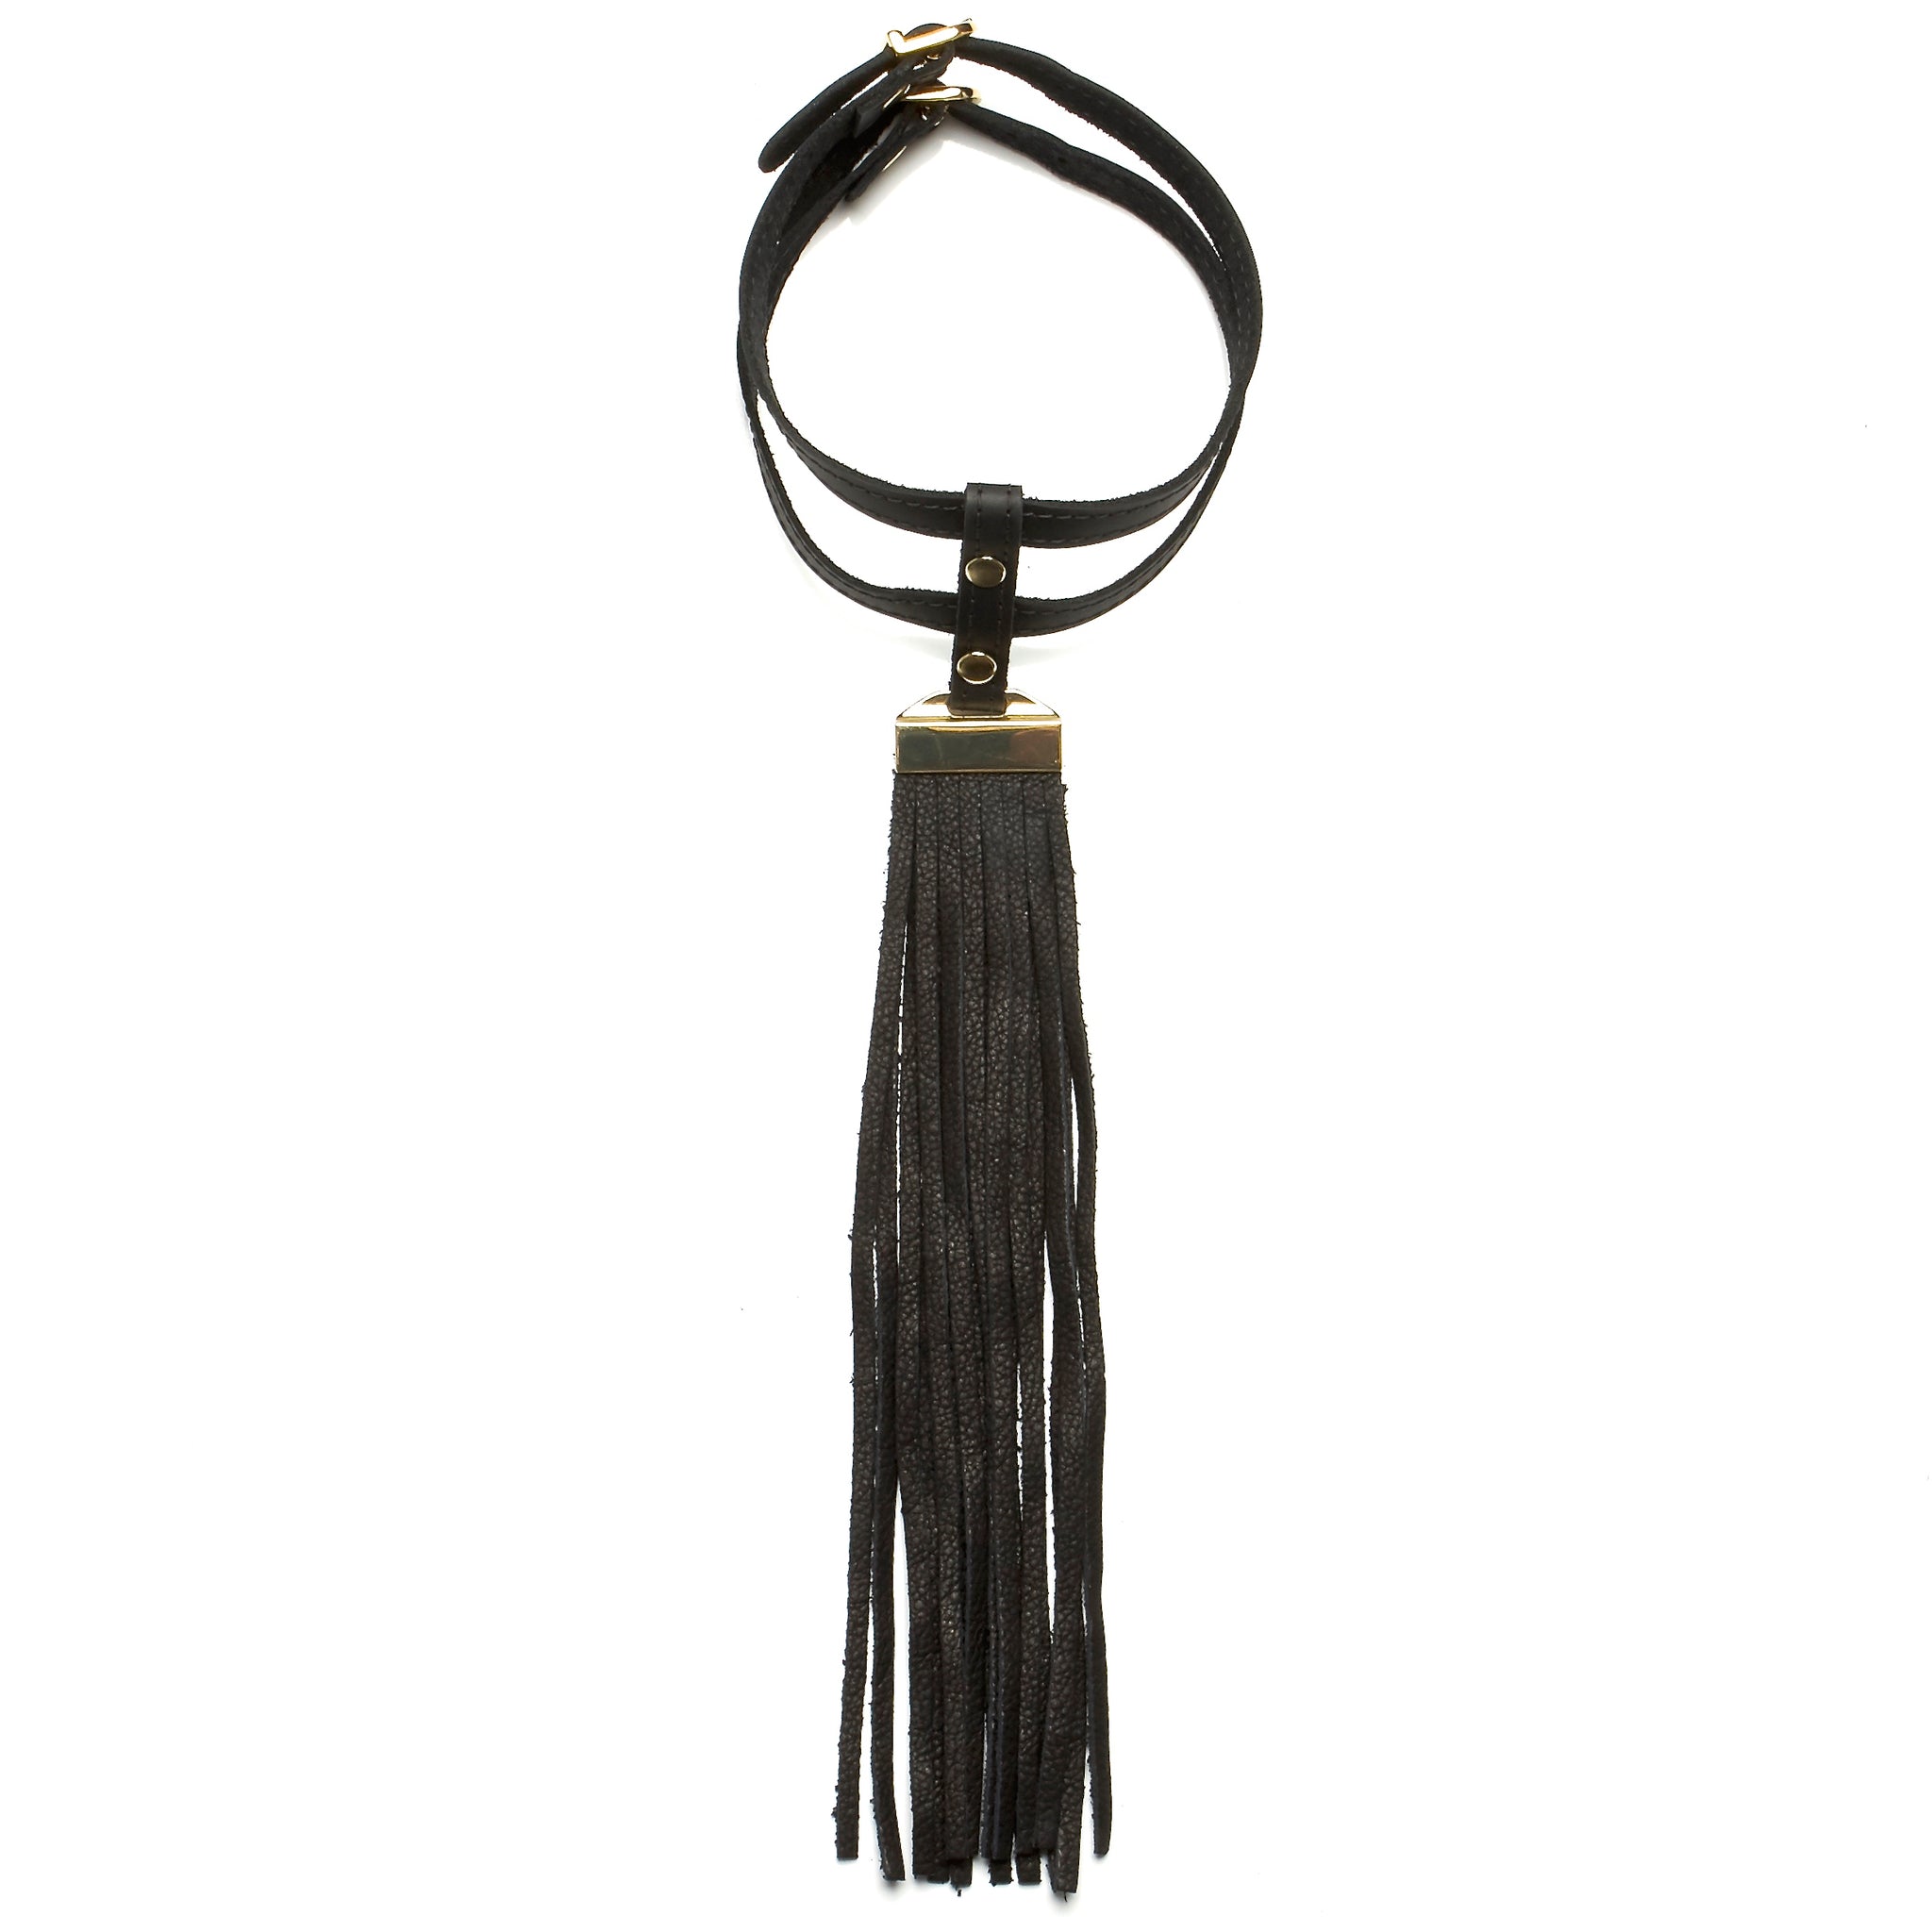 DOUBLE LEATHER CHOKER NECKLACE WITH LONG DEERSKIN LEATHER FRINGE by nyet jewelry